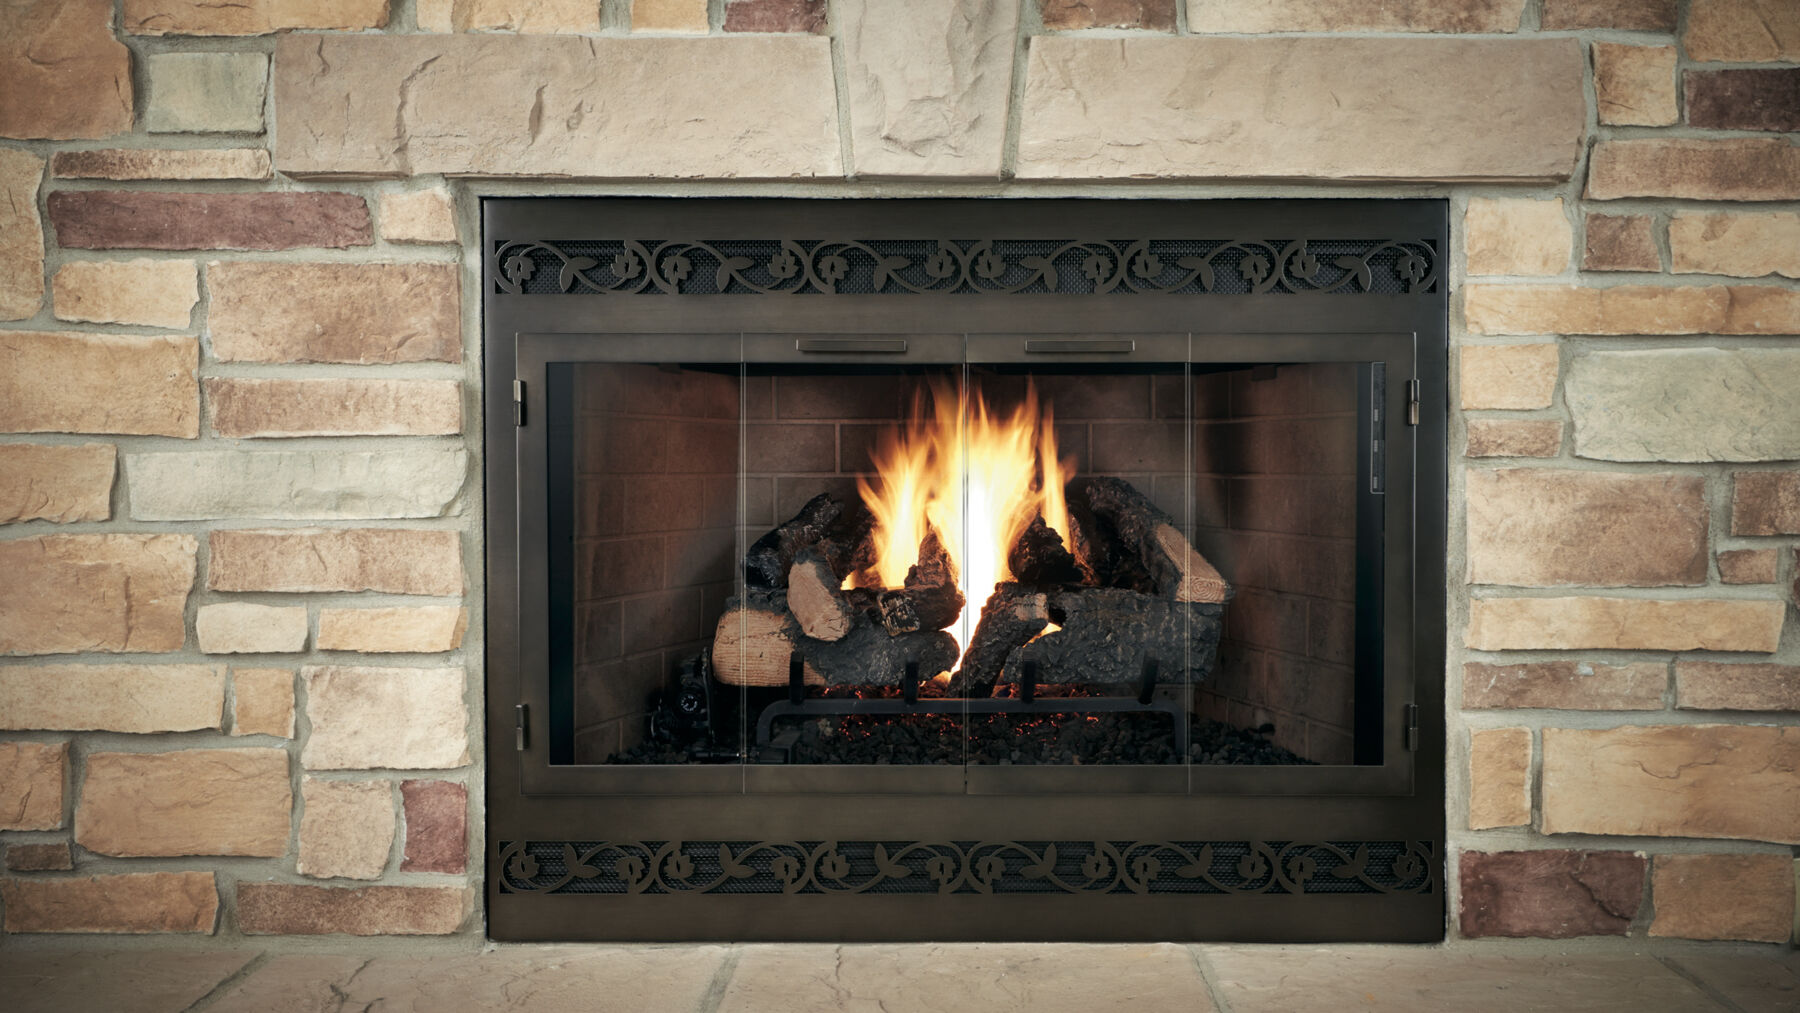 A traditional masonry hearth with a black fireplace, a log set, and distressed, bronze-colored tri-fold glass doors.